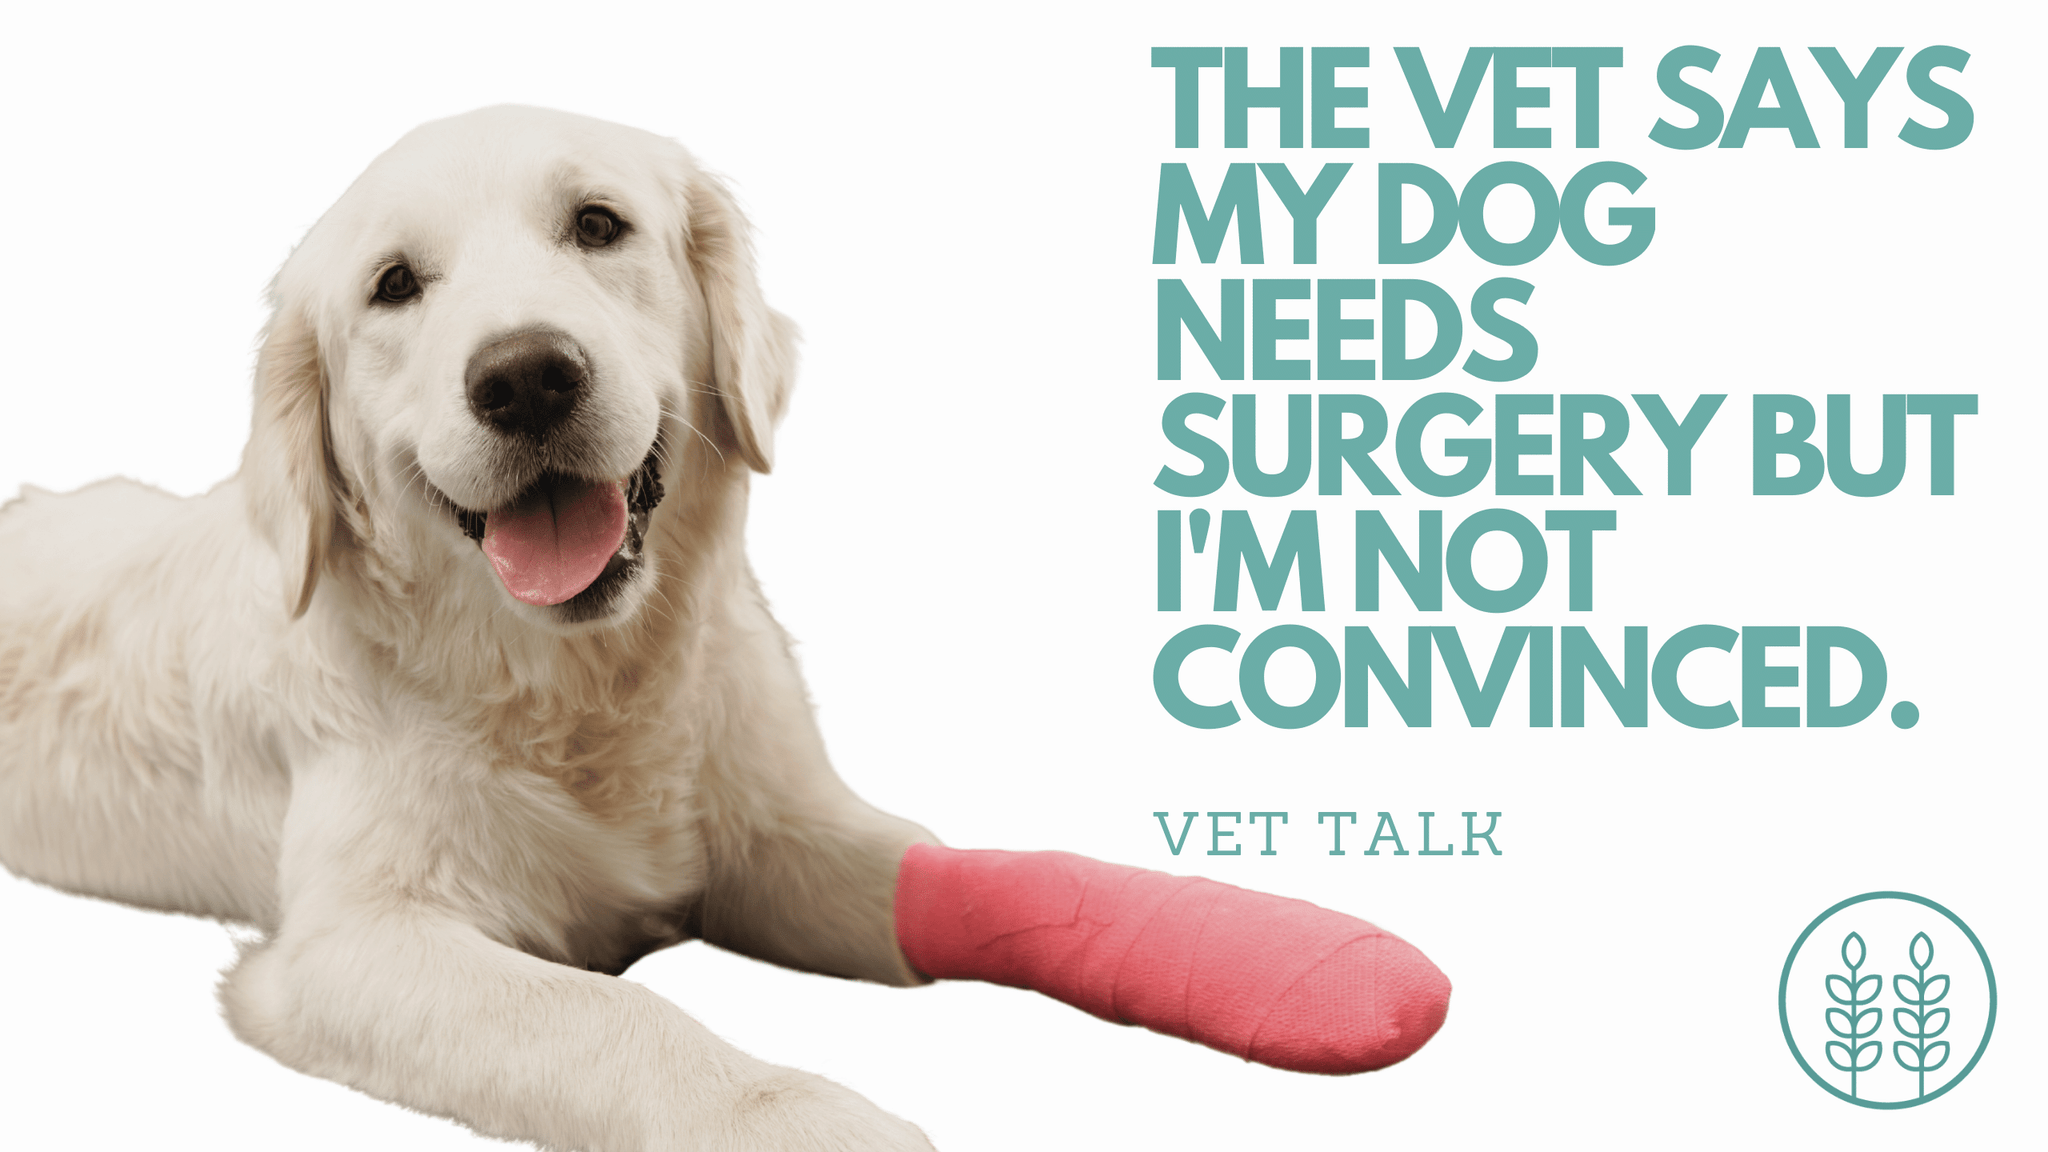 Q: My vet says my dog needs surgery on her leg. I am not convinced that is the problem. What do I do?